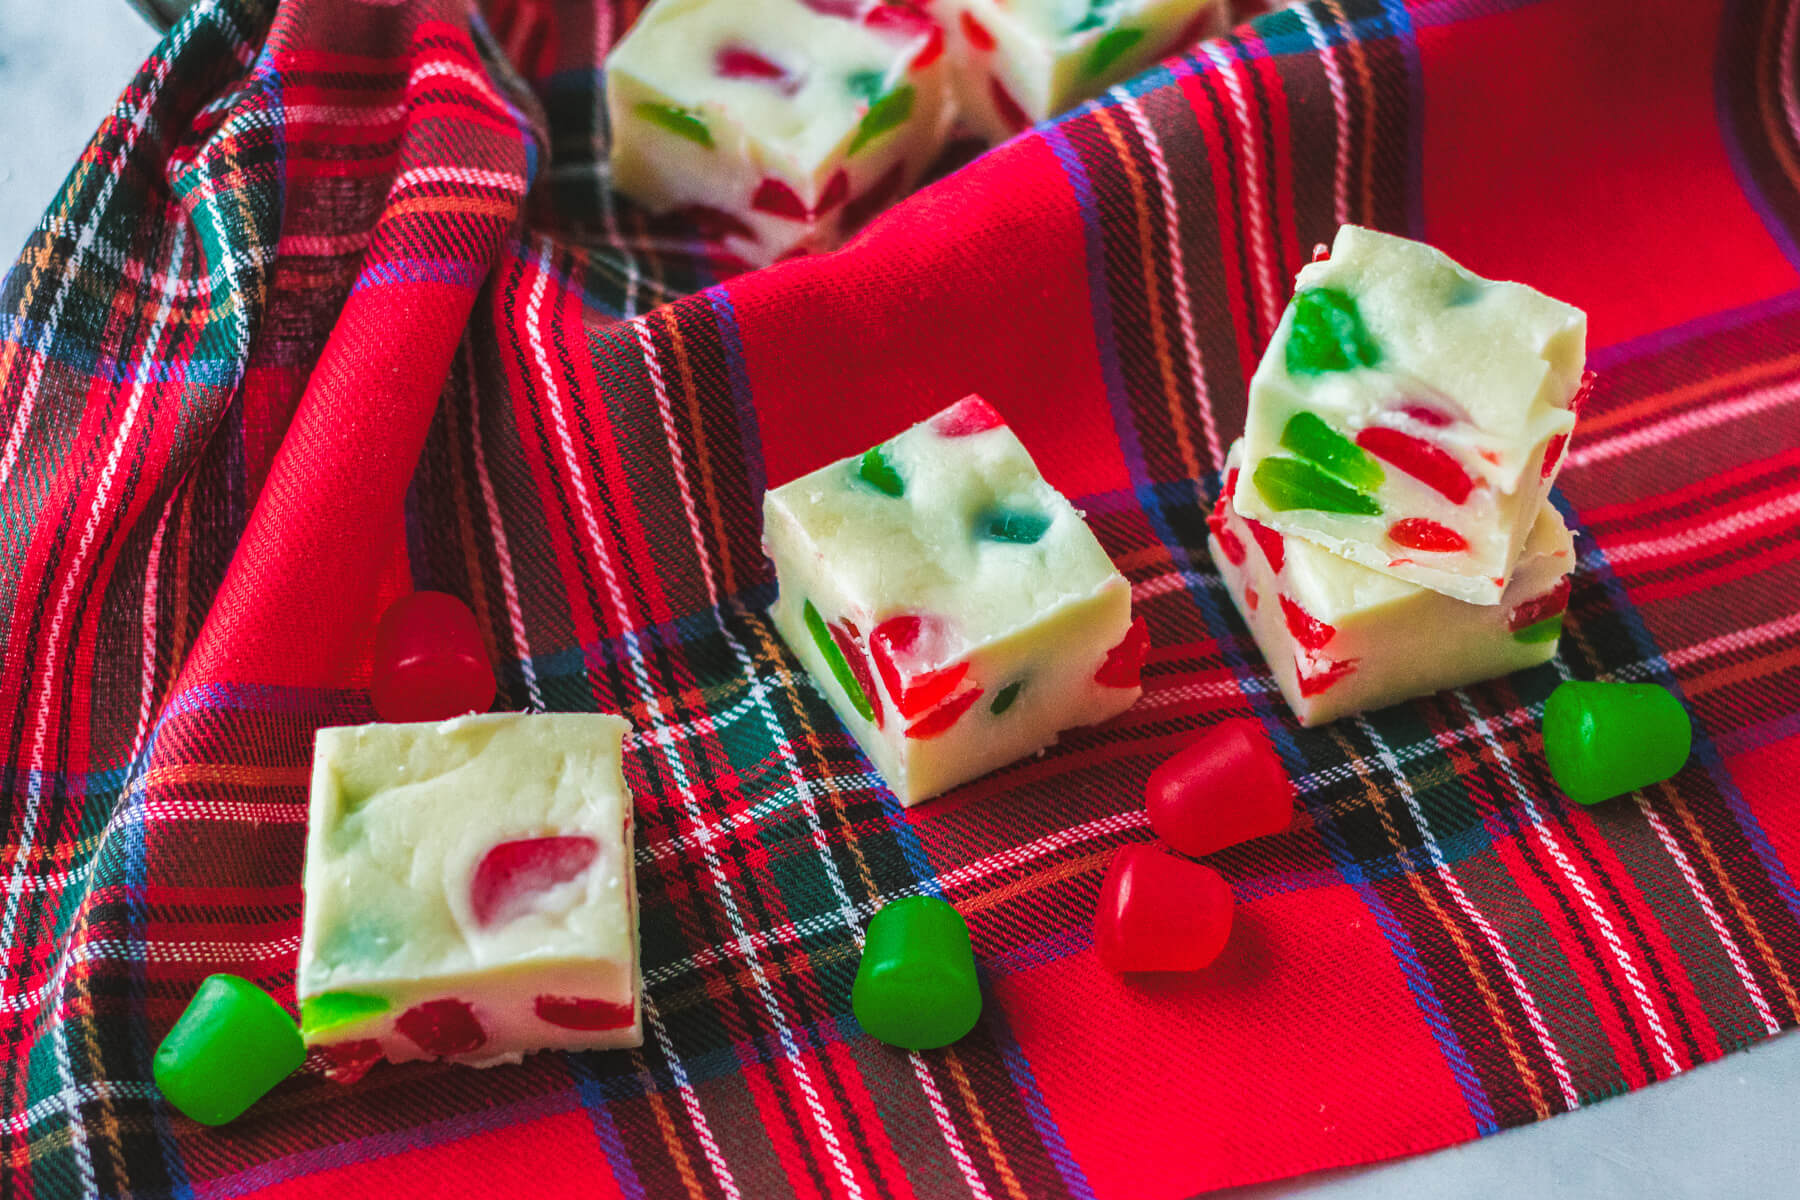 Three pieces of white fudge dotted with red and green gumdrop candies on a plaid napkin.